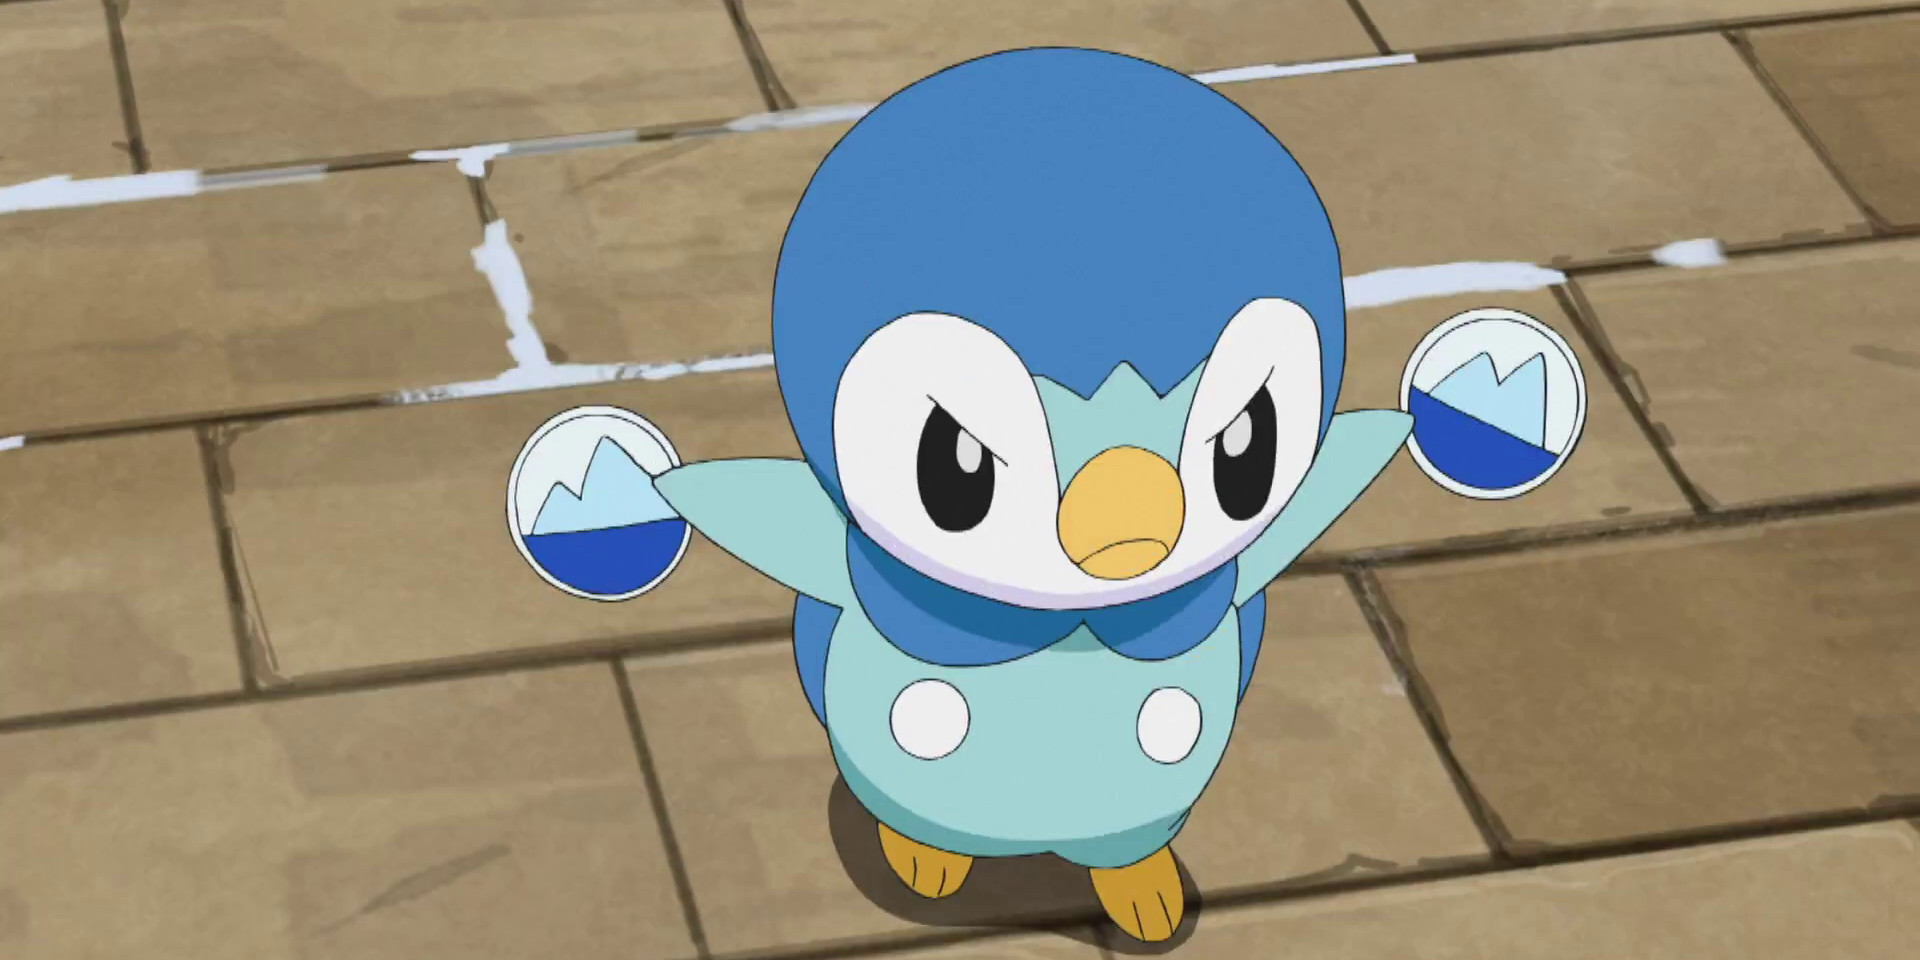 Piplup from the Pokemon series